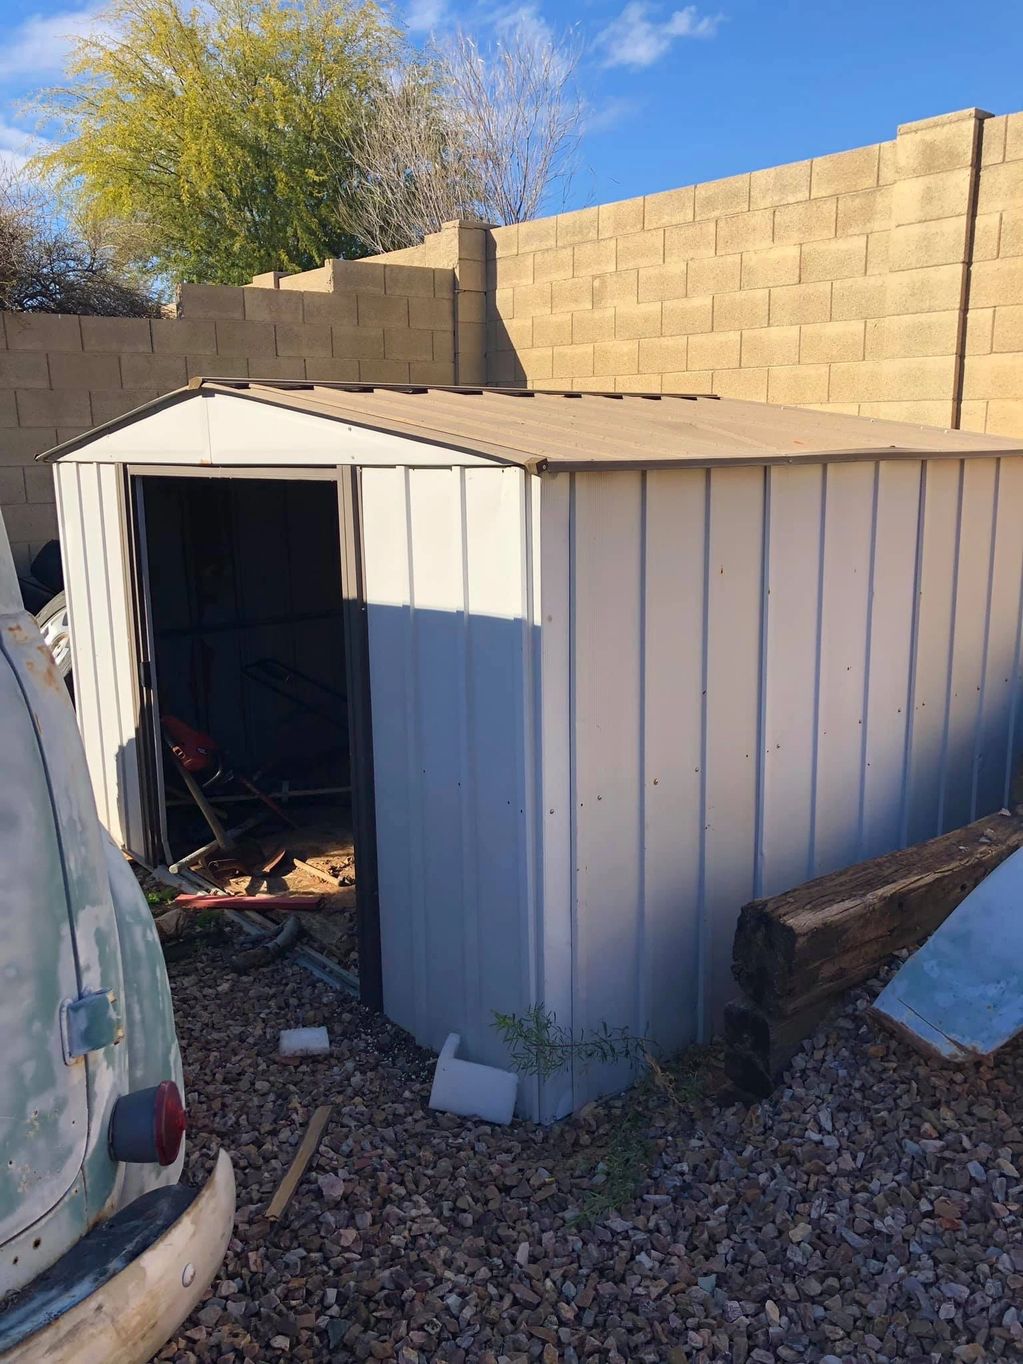 Shed disposal 
Shed removal
Greenhouse removal 
Chicken coop demo  
Storage shed disposal